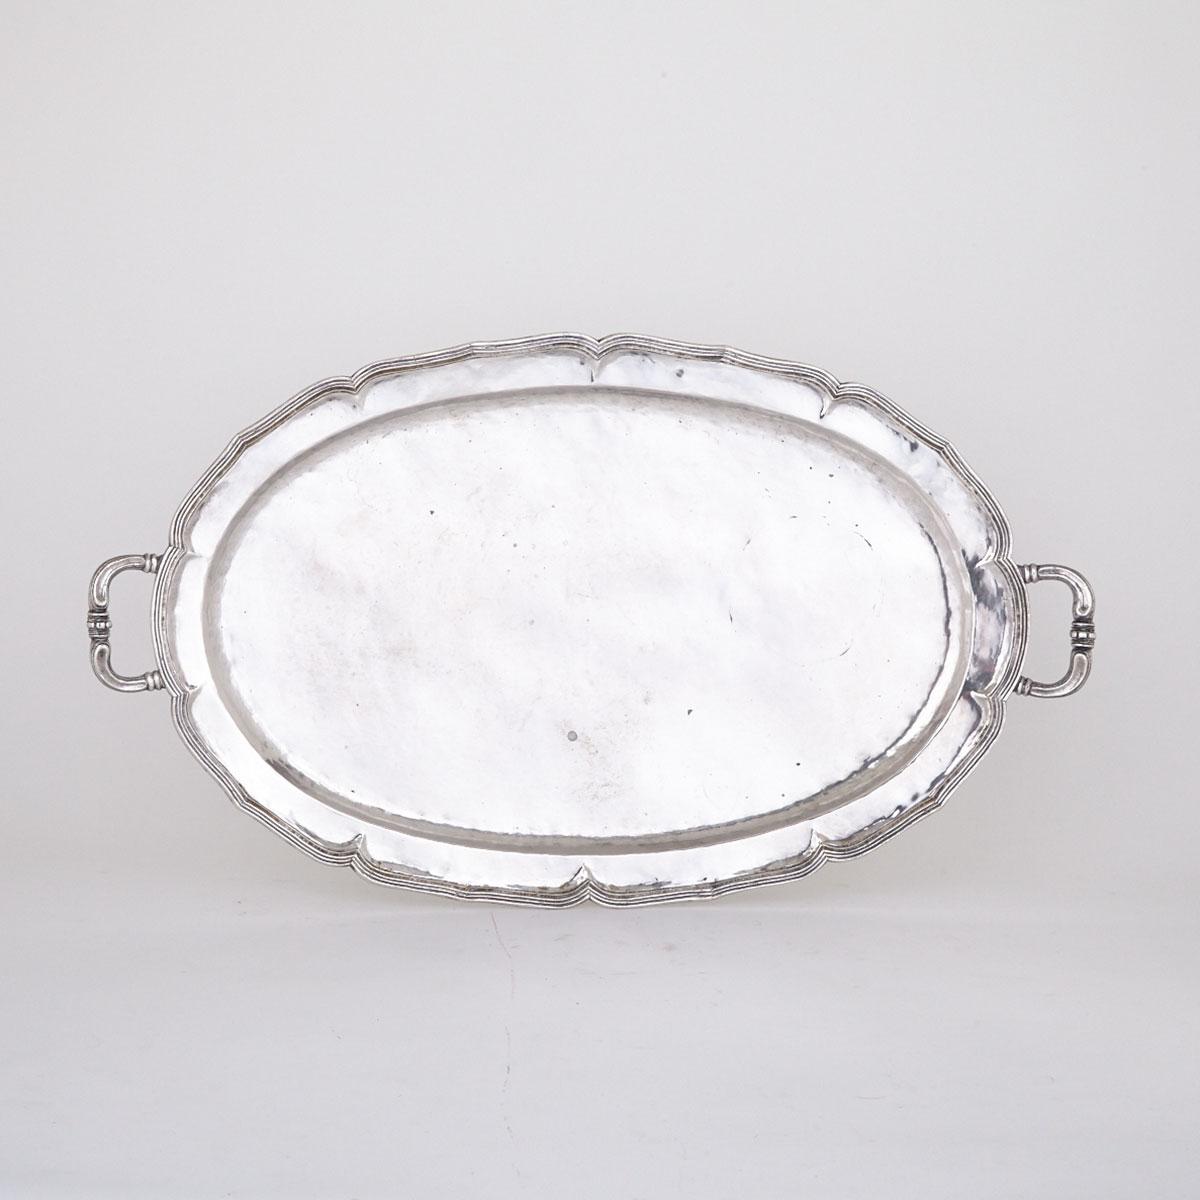 South American Silver Two-Handled Oval Serving Tray, 19th/20th century